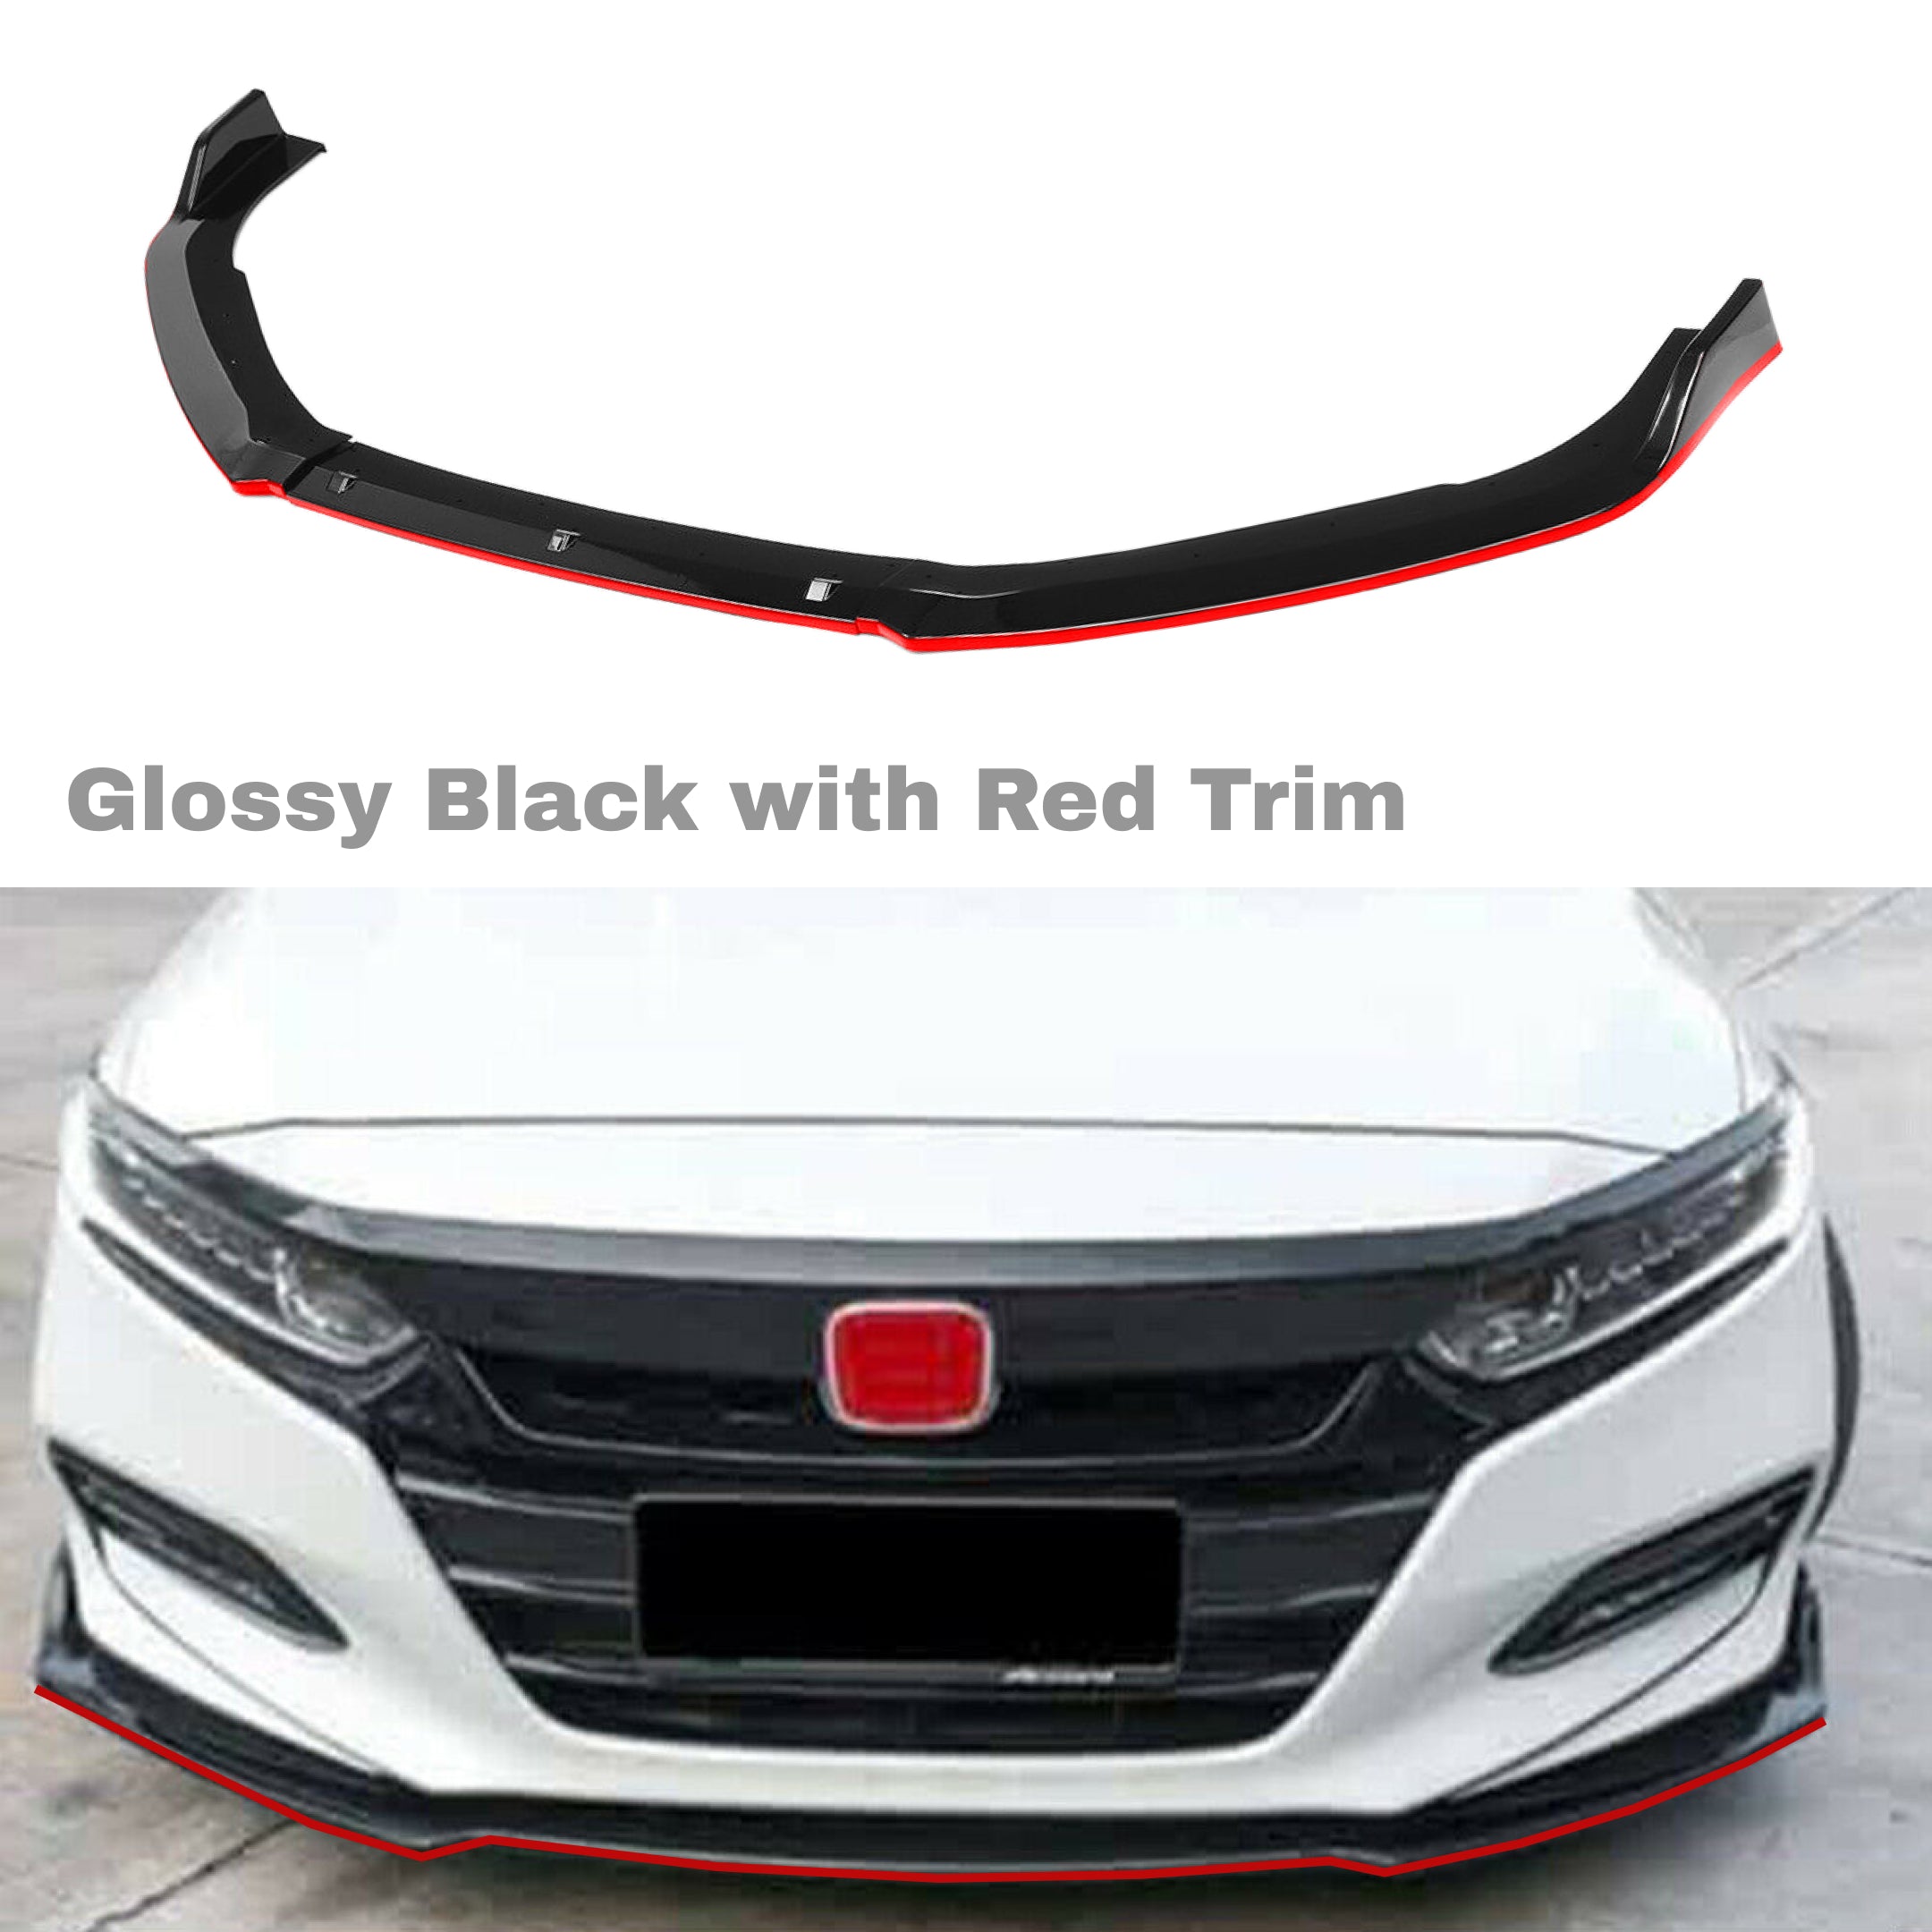 Fits 2013-2017 Honda Accord Front Bumper Lip Spoiler (Gloss Black with Red Trim)